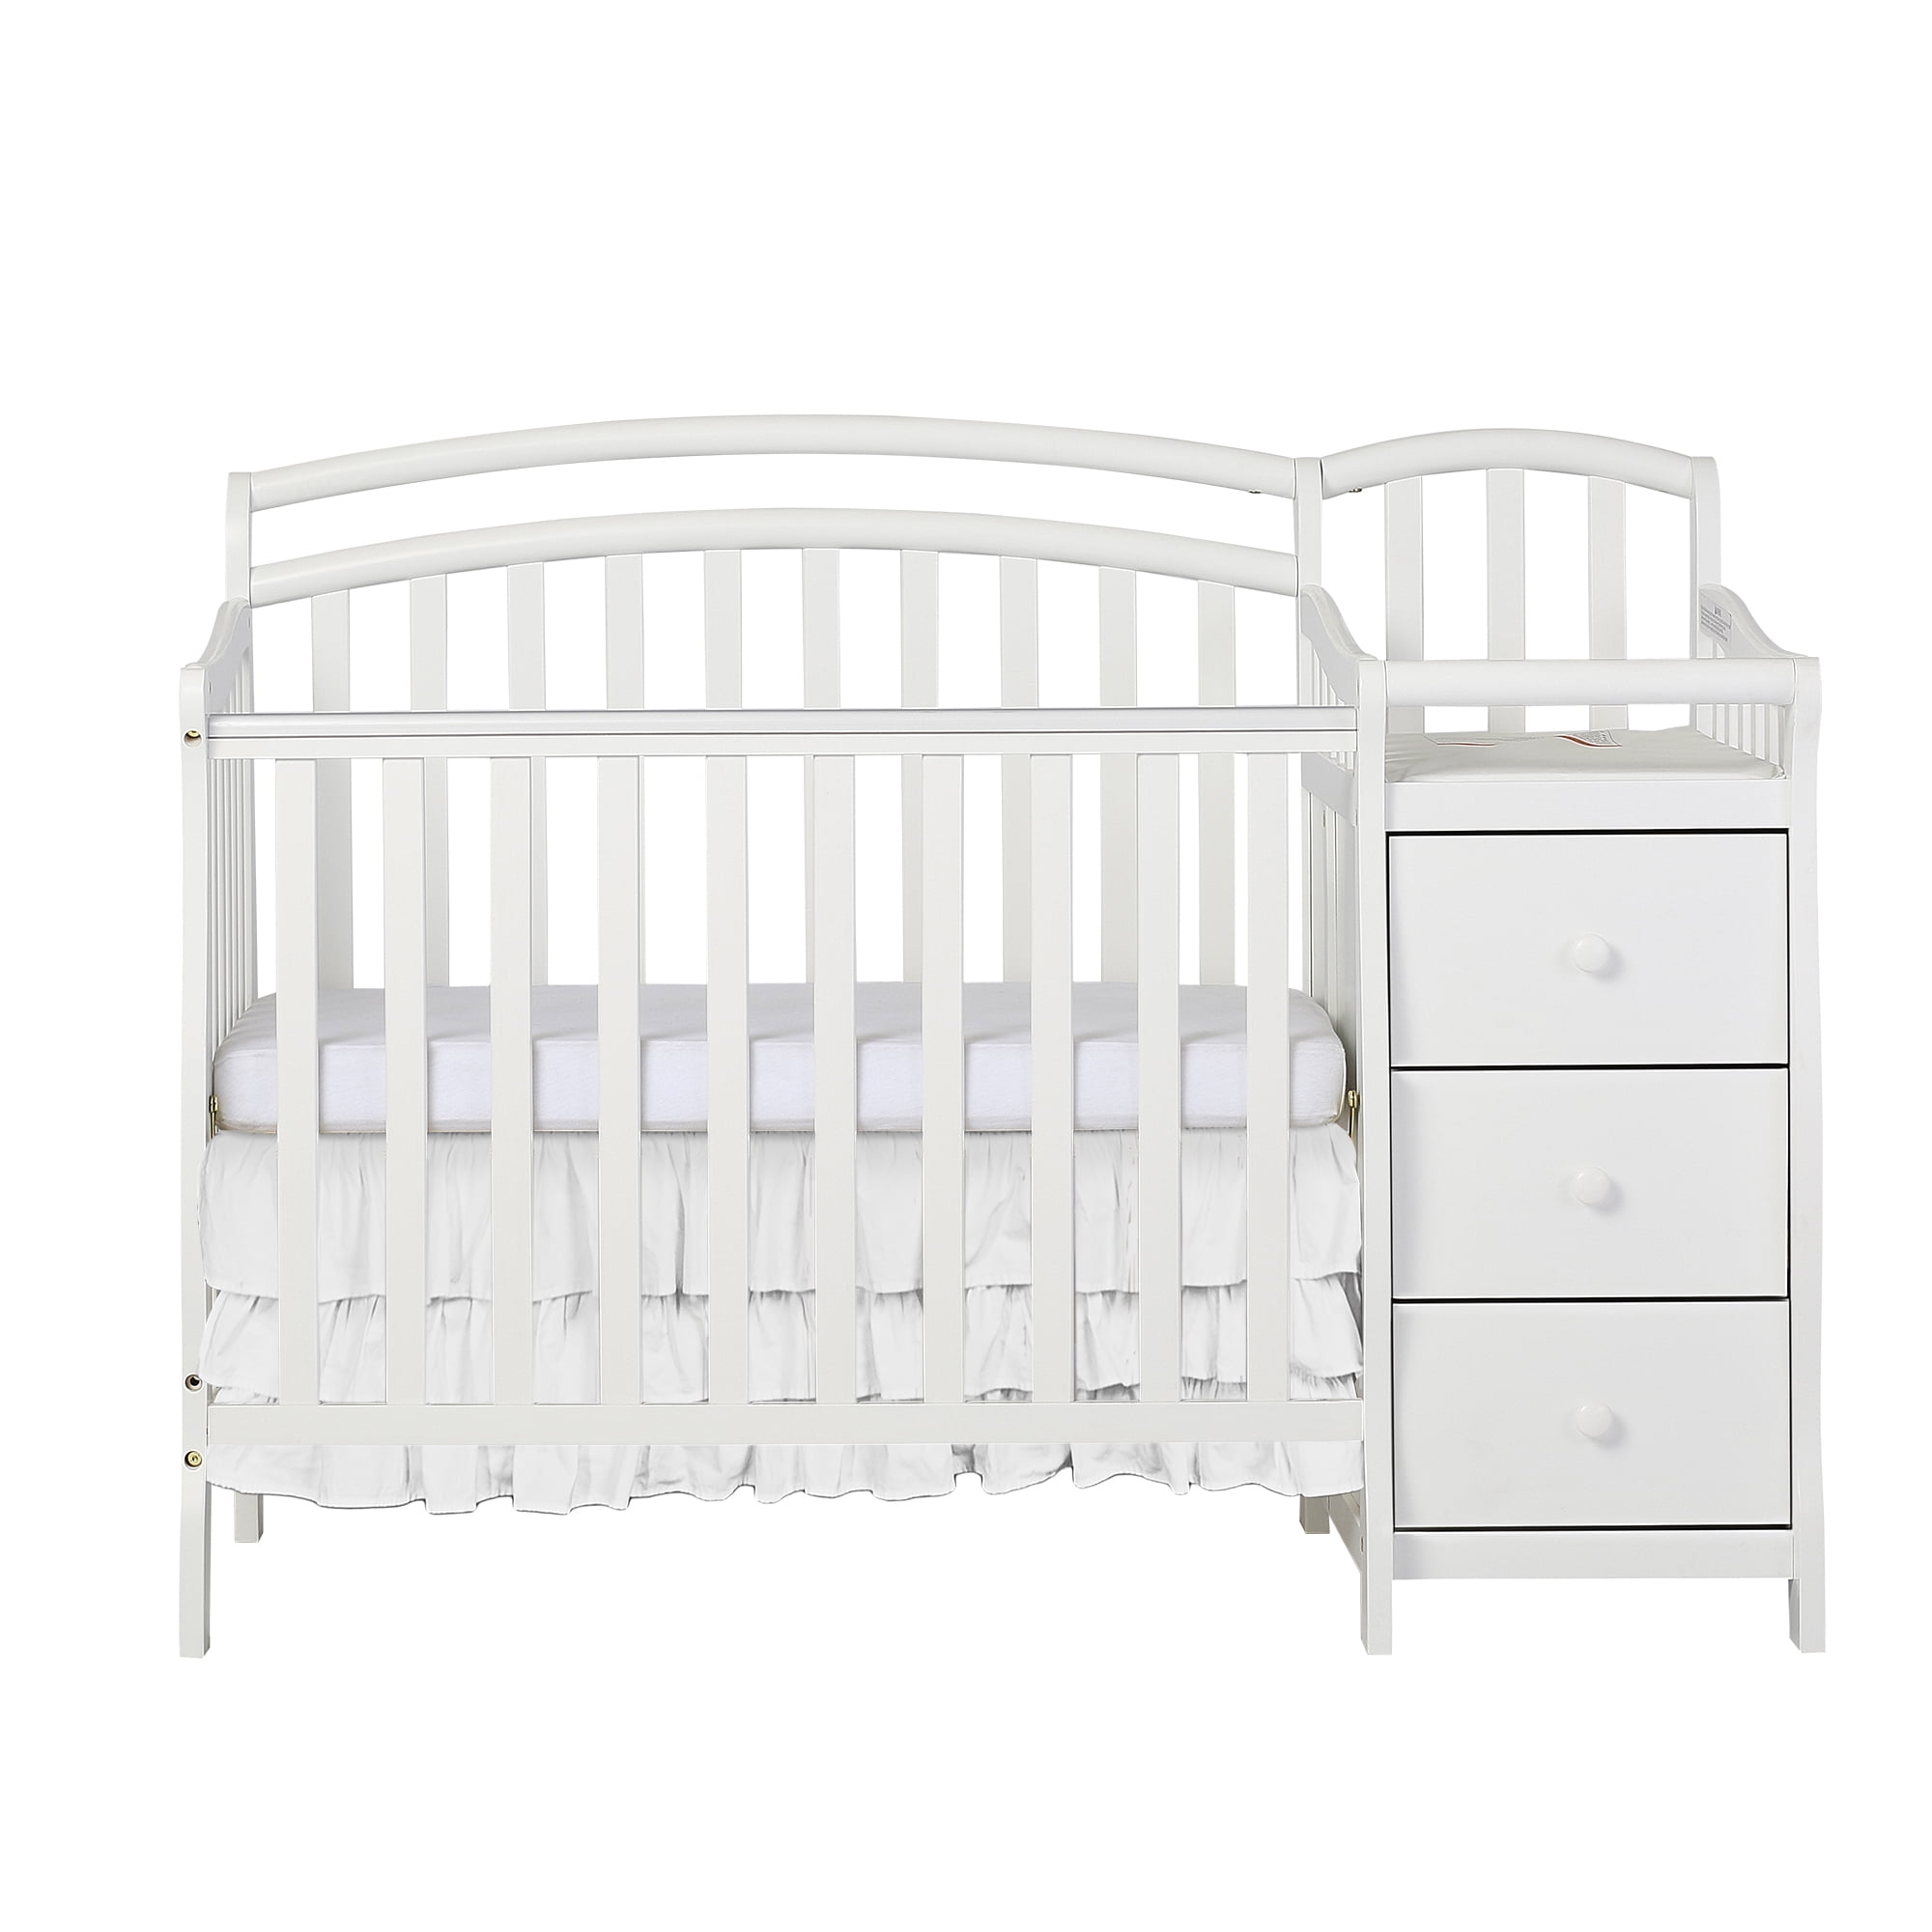 crib with changing table walmart